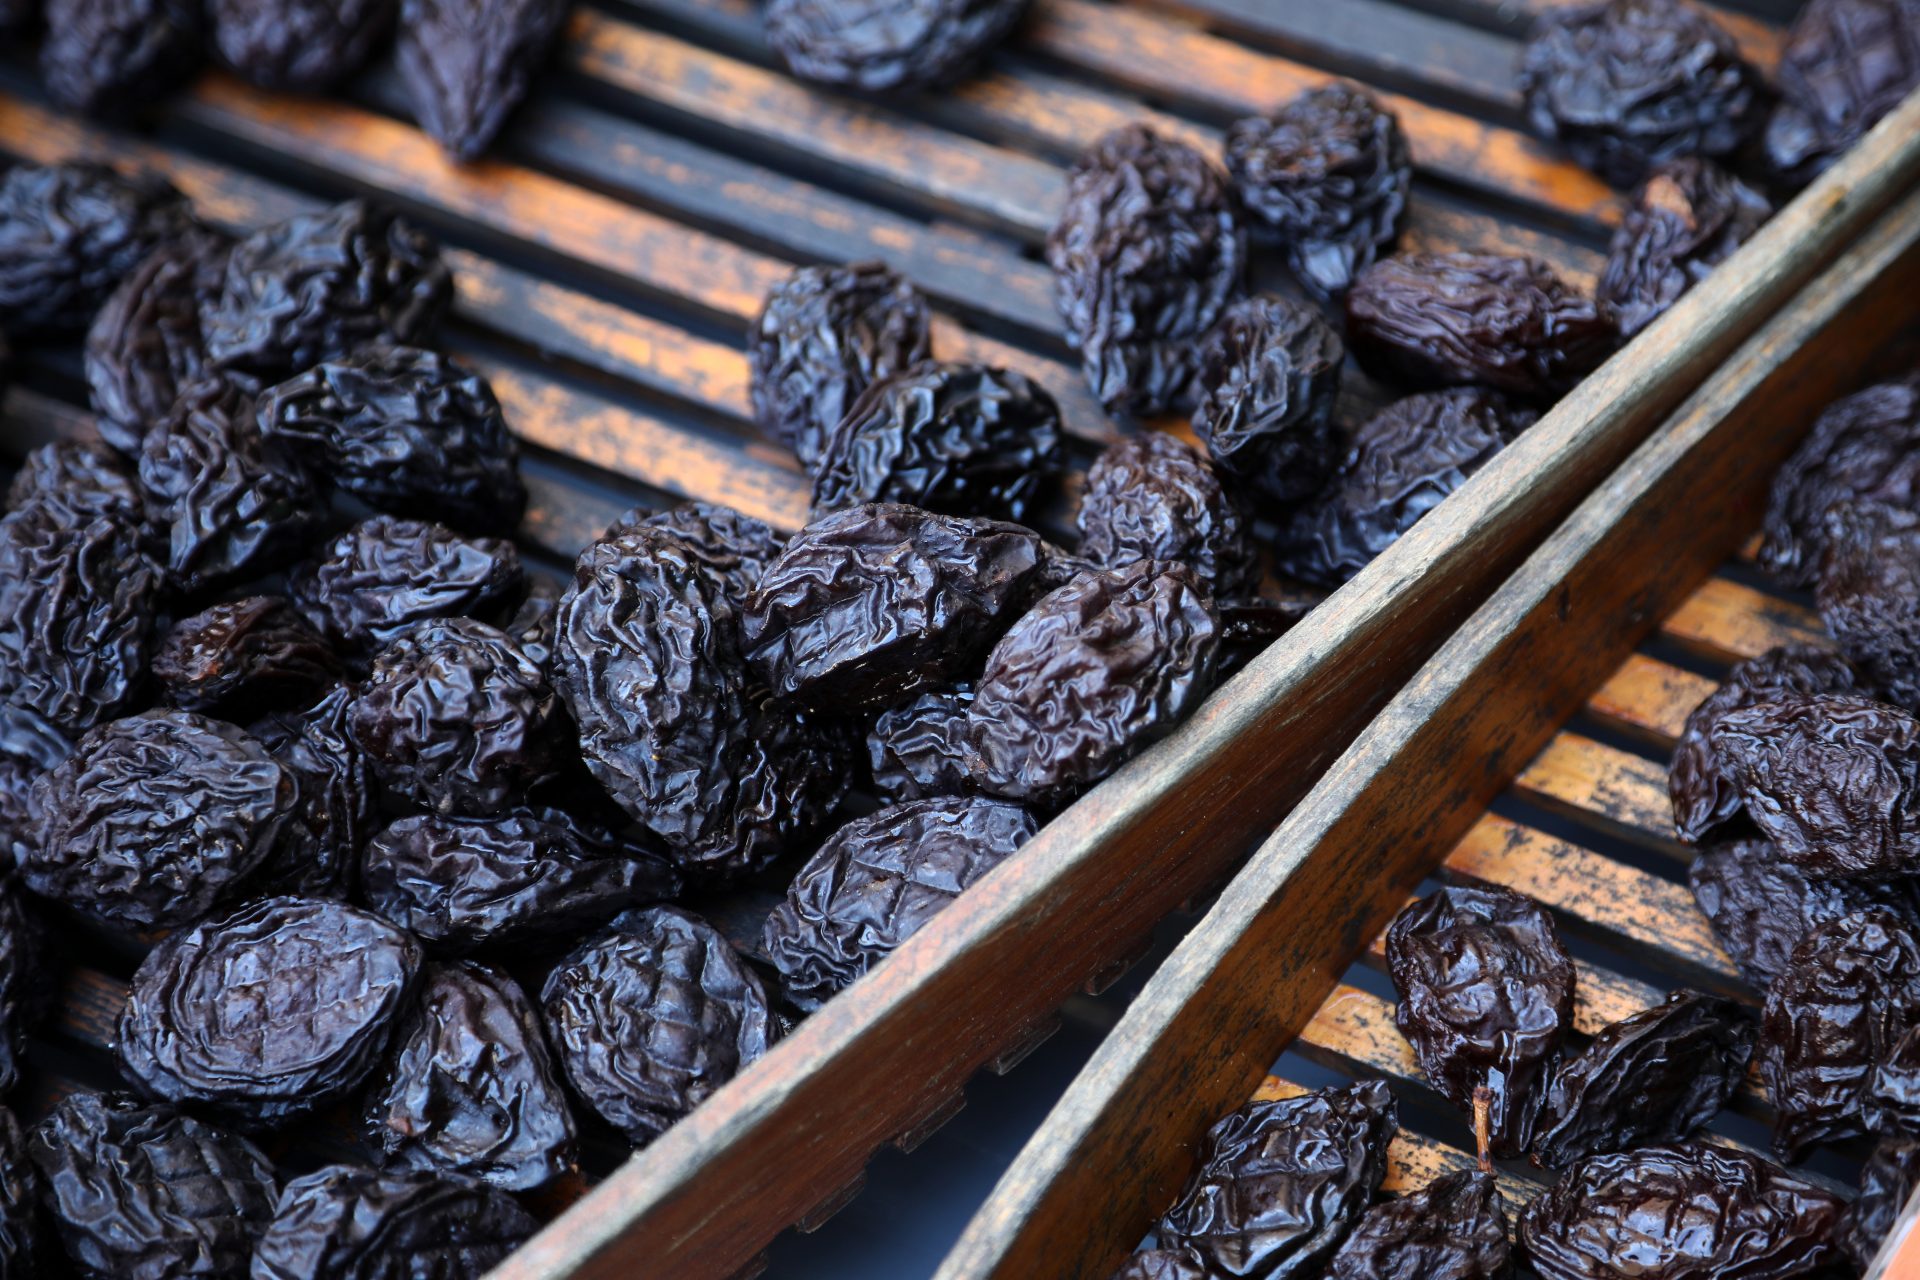 Prunes have long been linked with bowel movements 